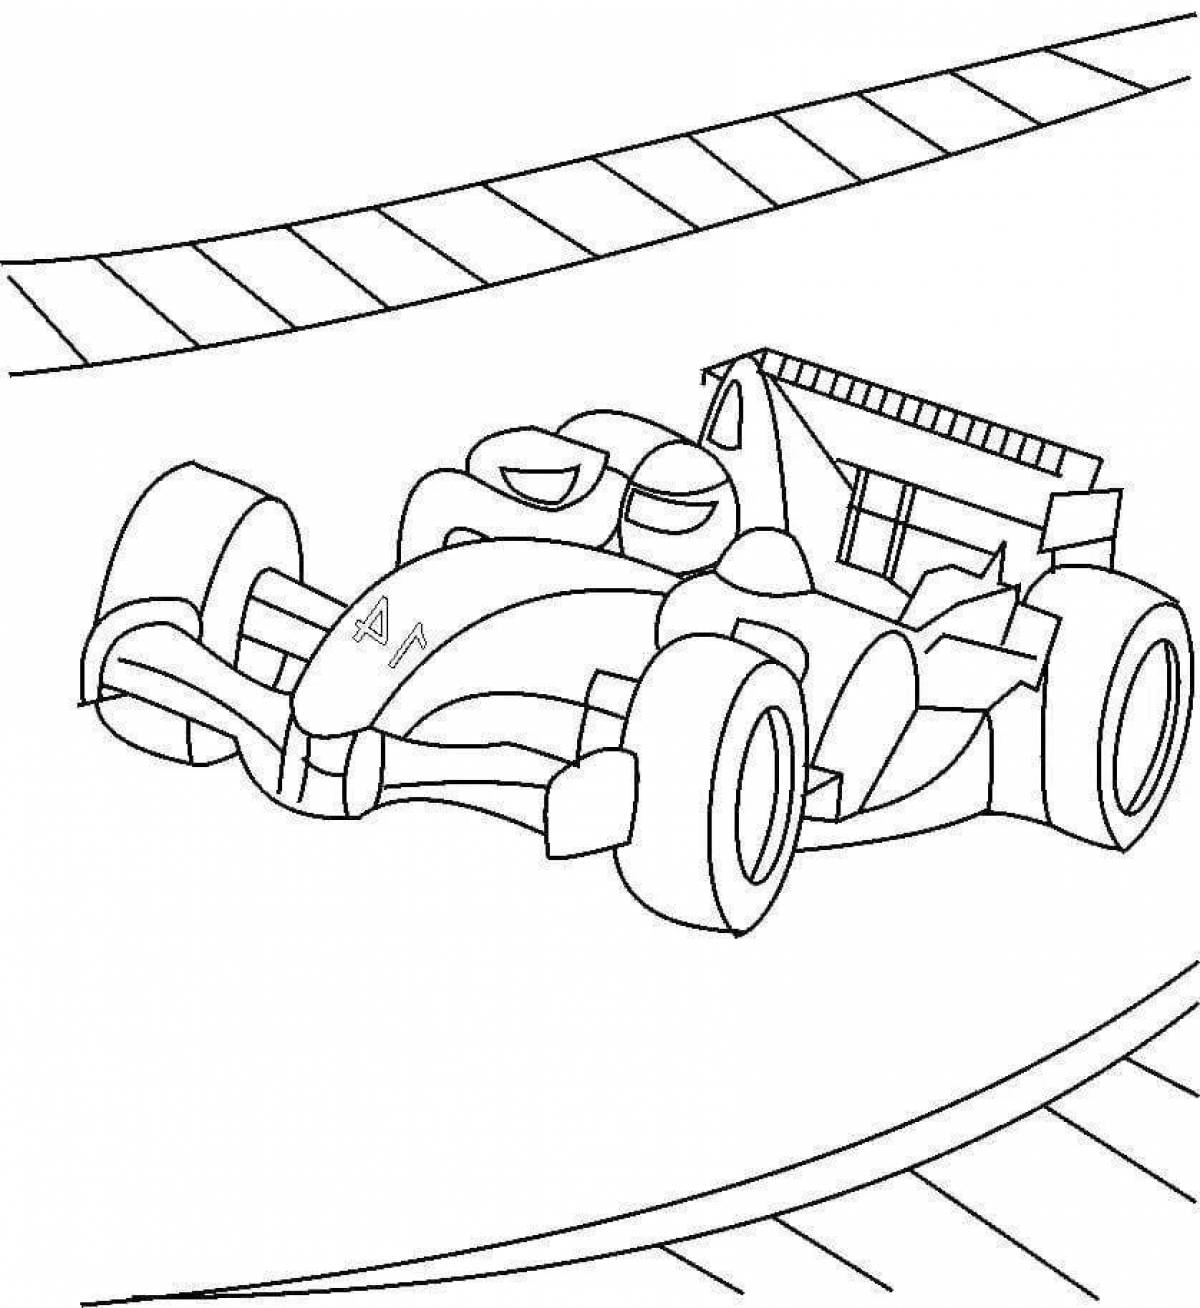 Playful car race coloring page